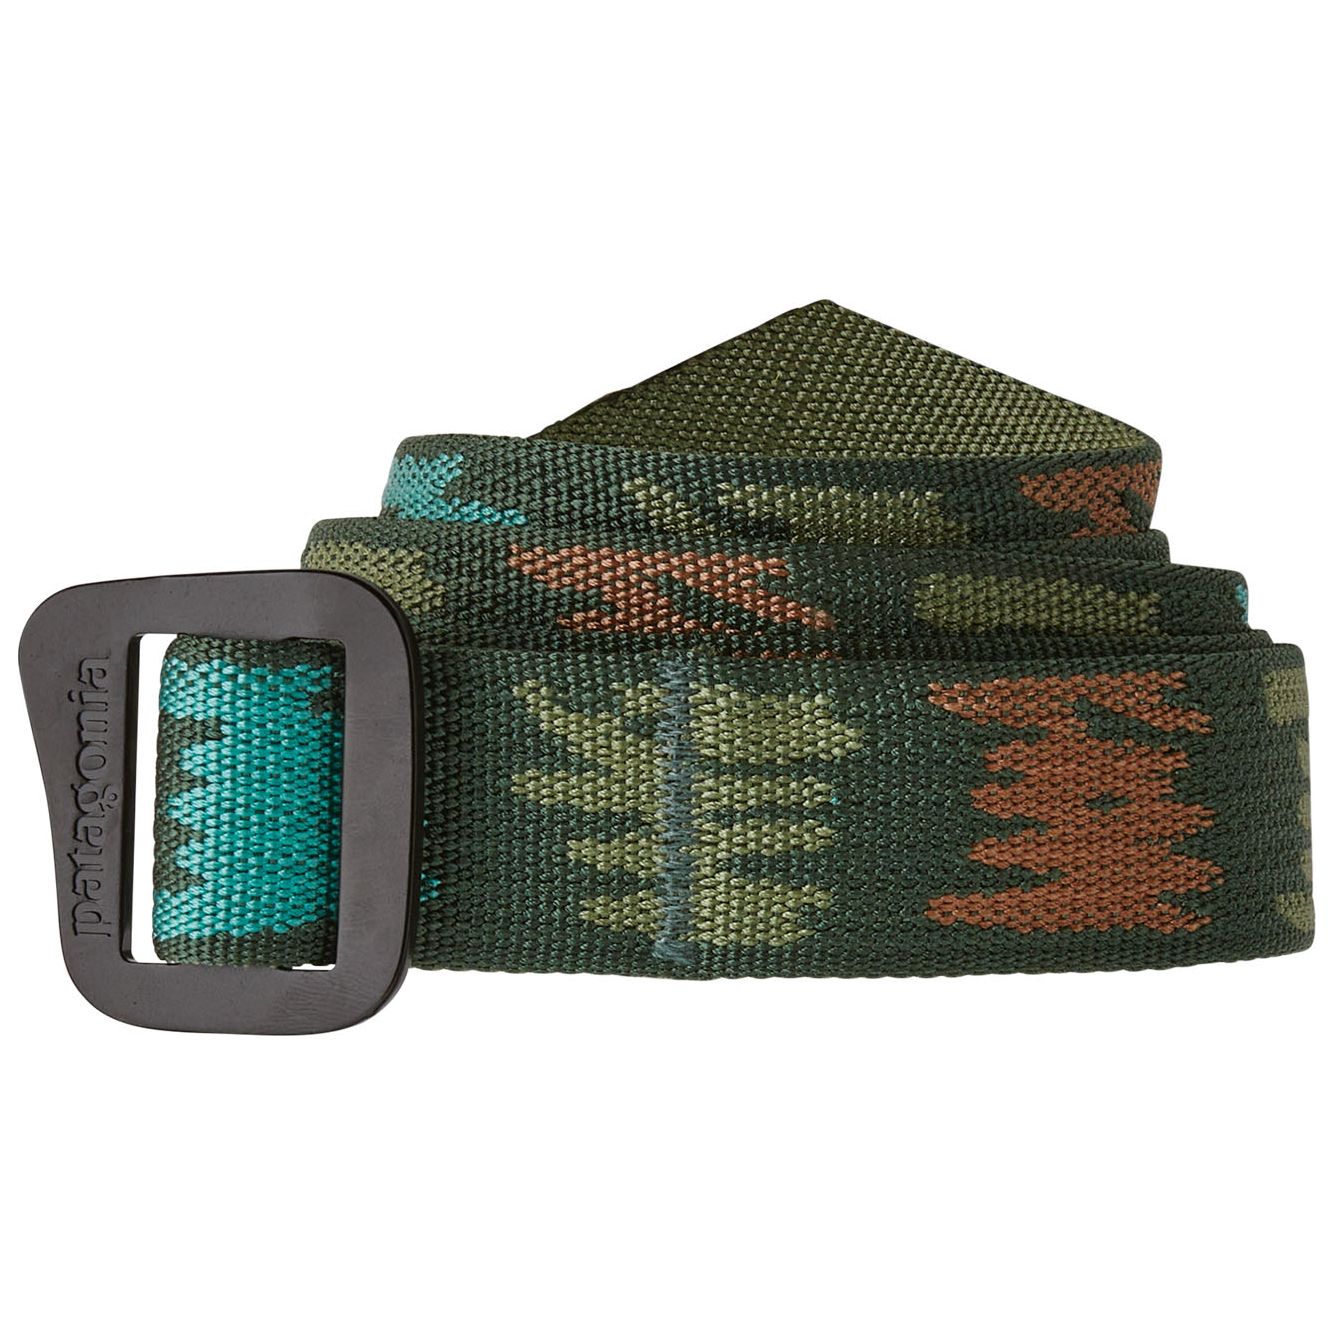 Patagonia Friction Belt Intertwined Hands: Hemlock Green Image 01